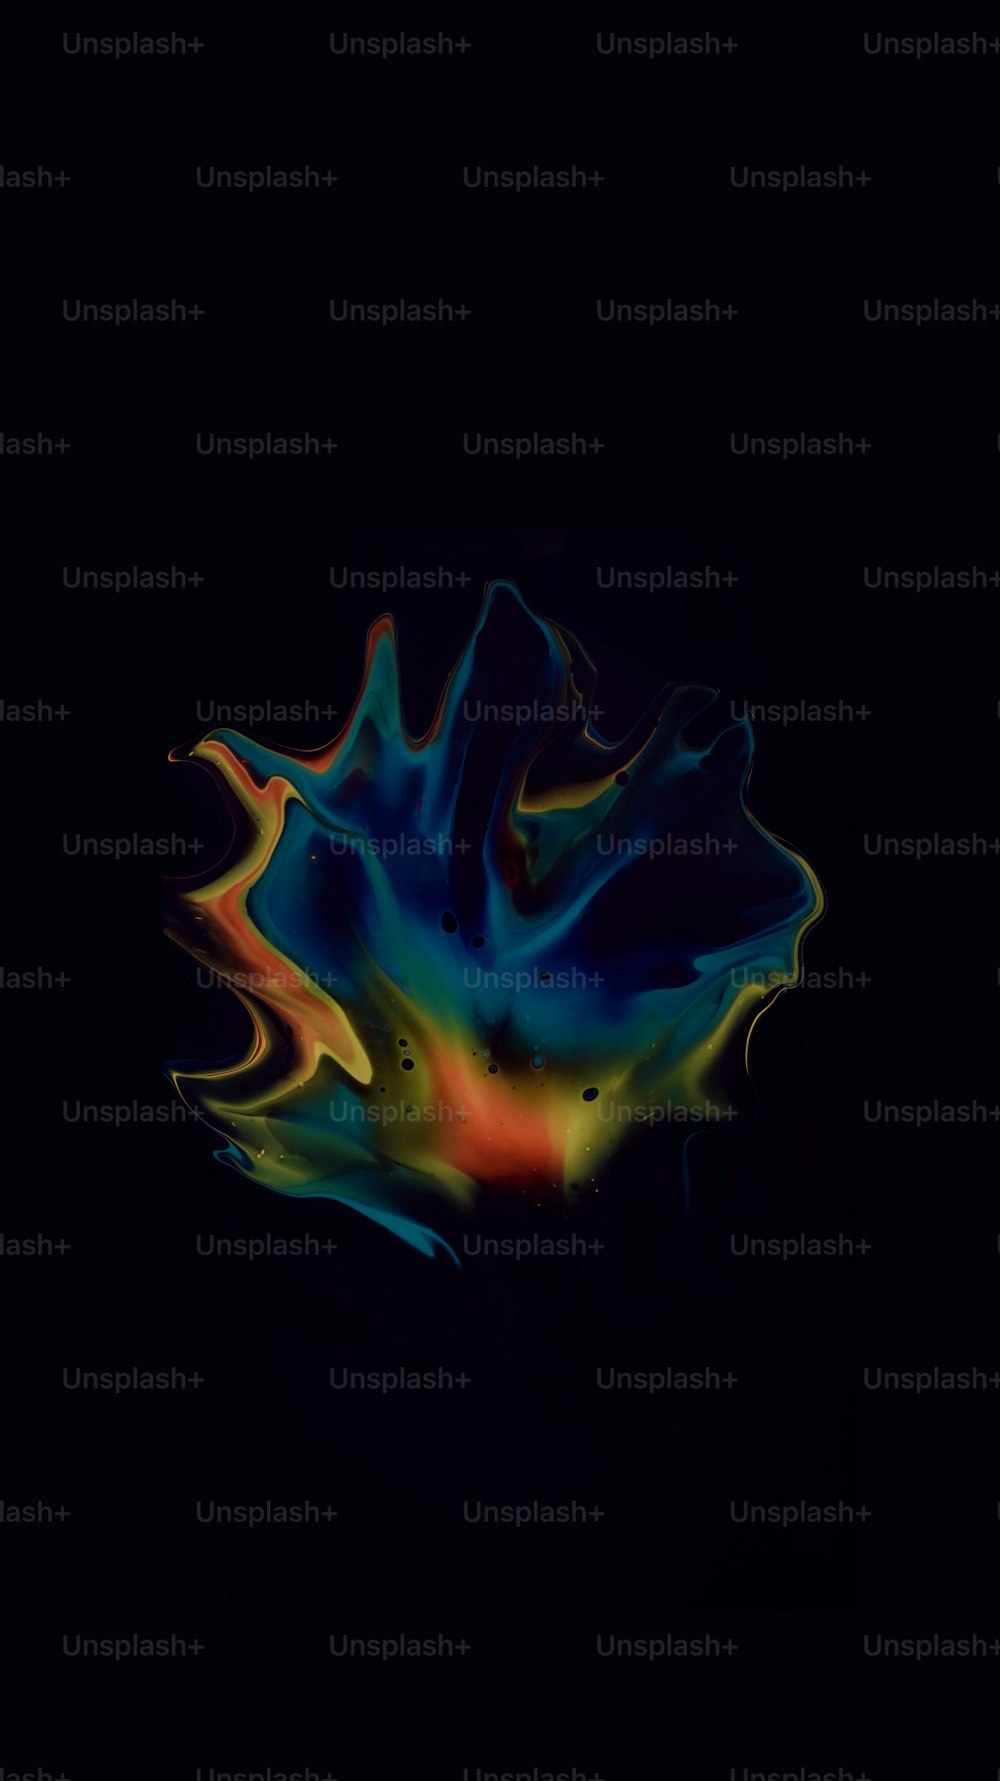 a black background with a multicolored substance